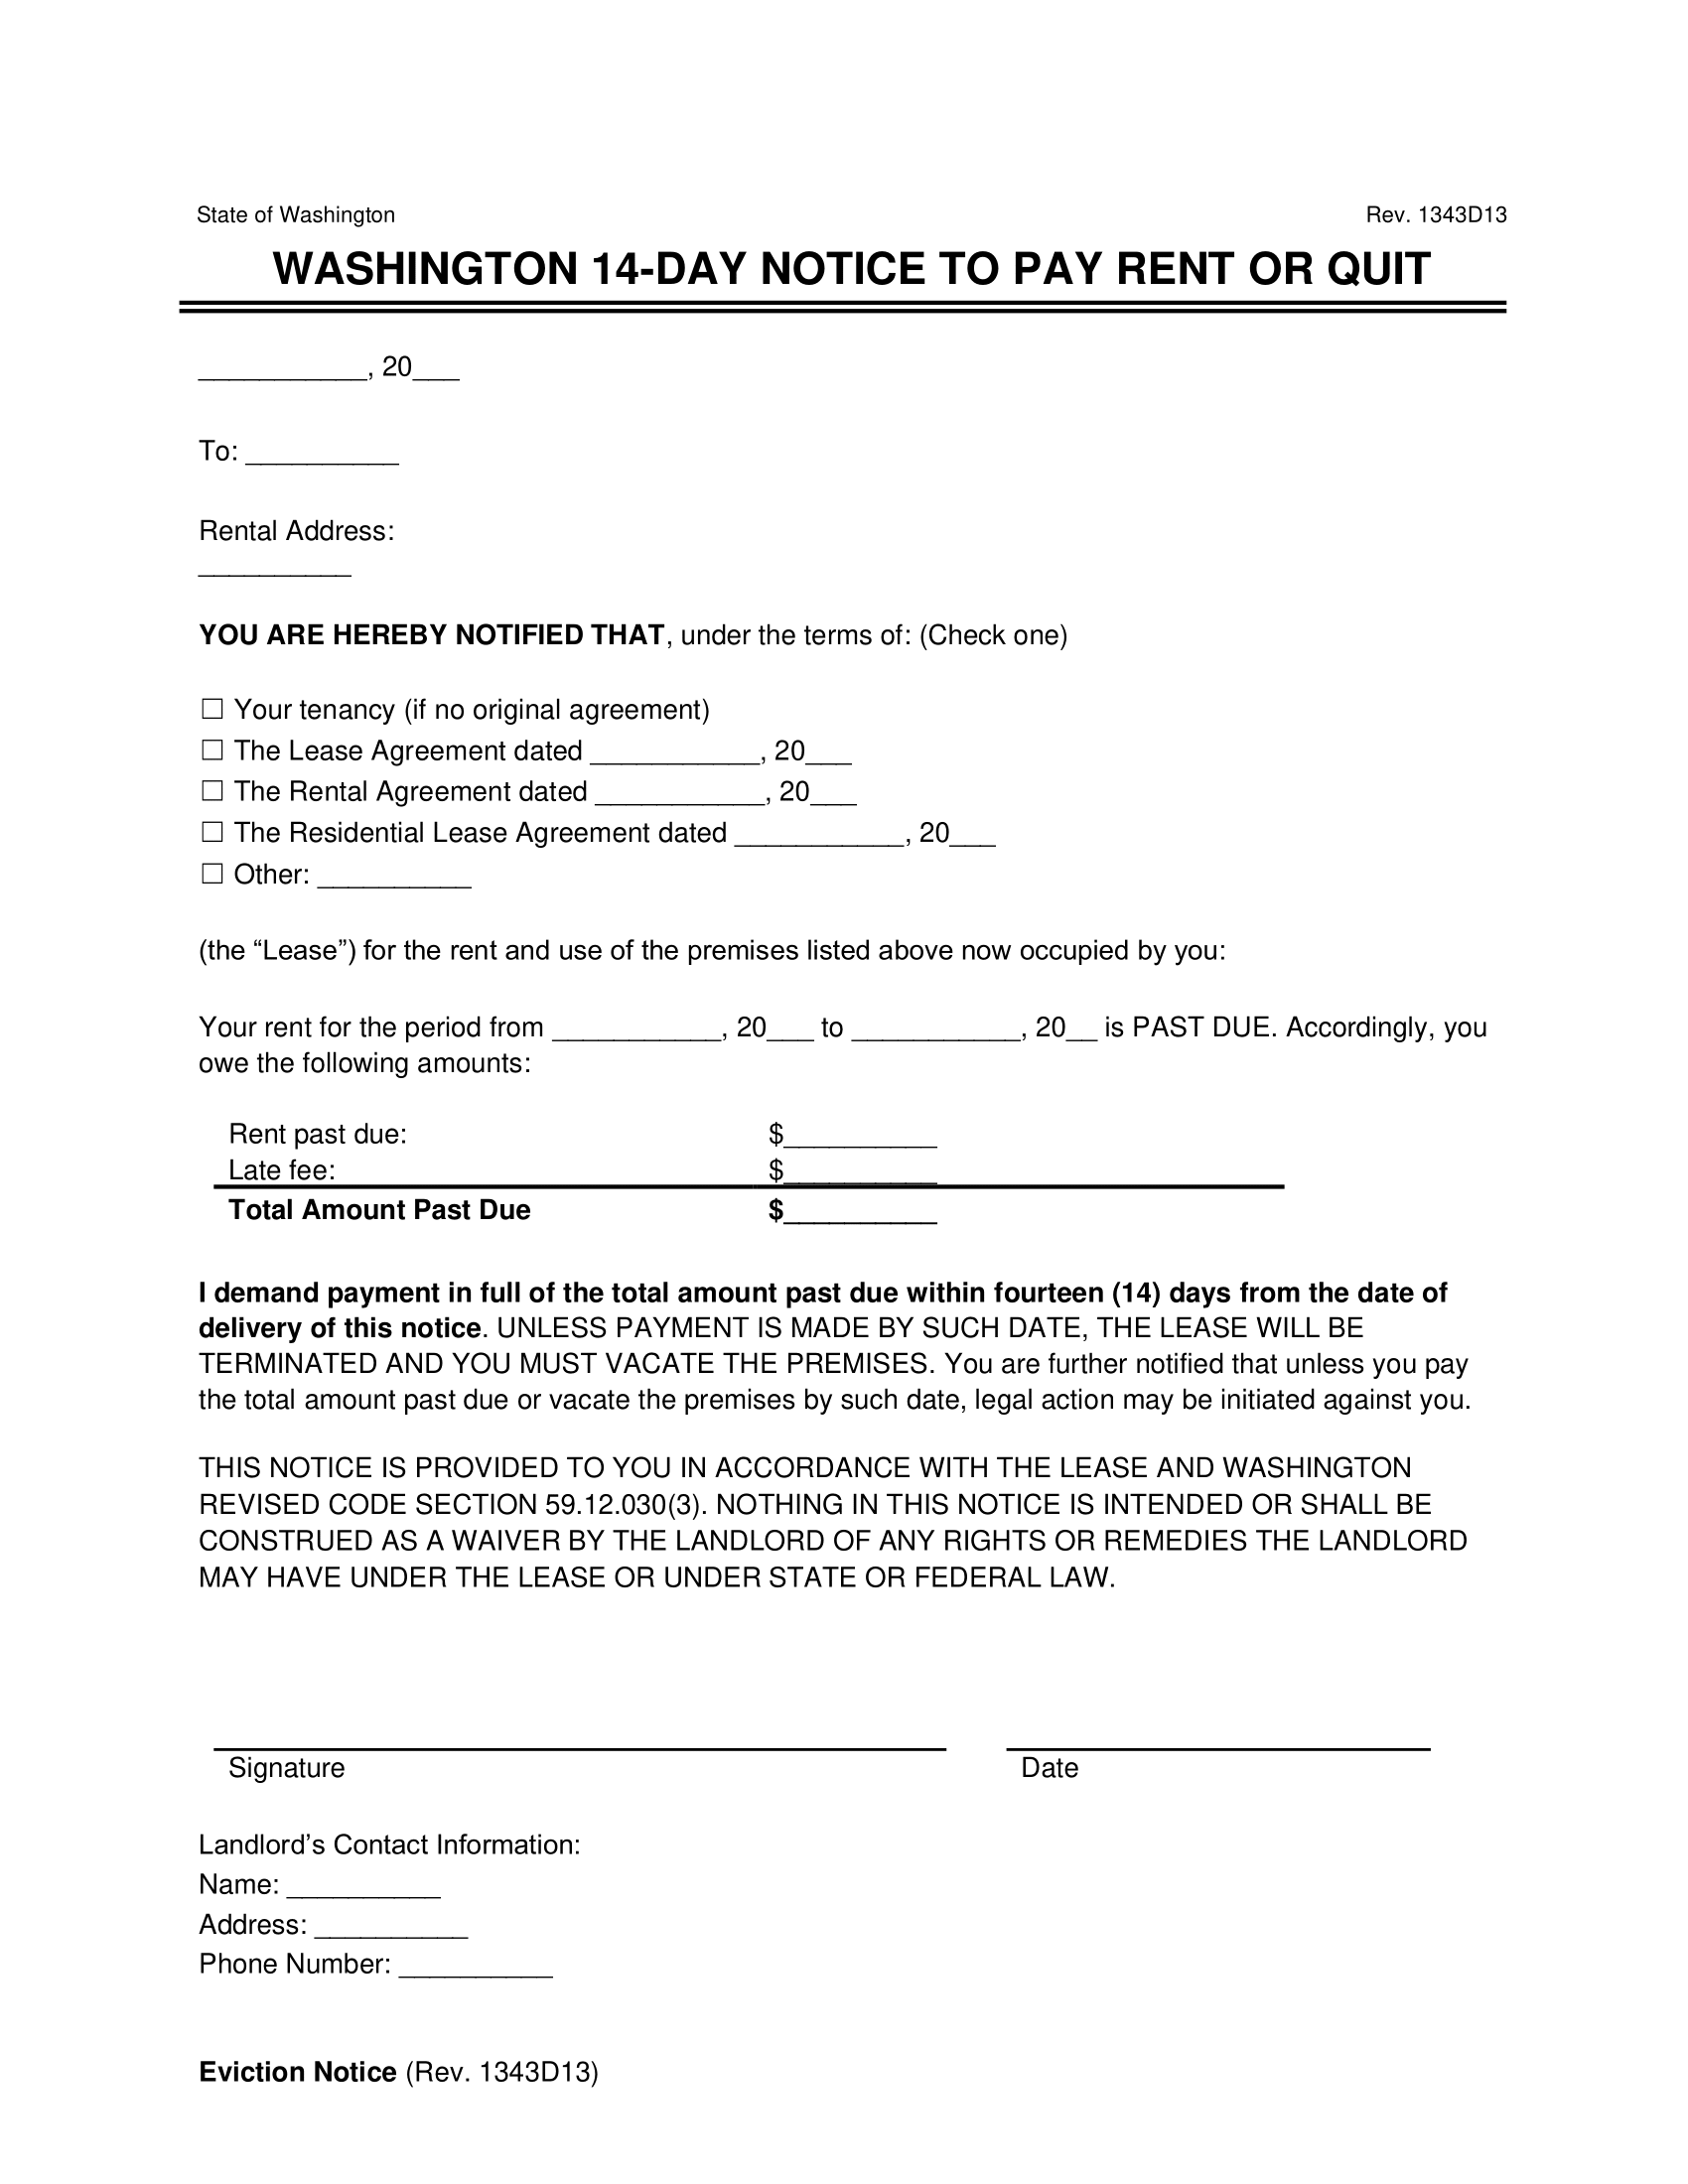 Washington 14-Day Eviction Notice to Quit (Non-Payment of Rent)